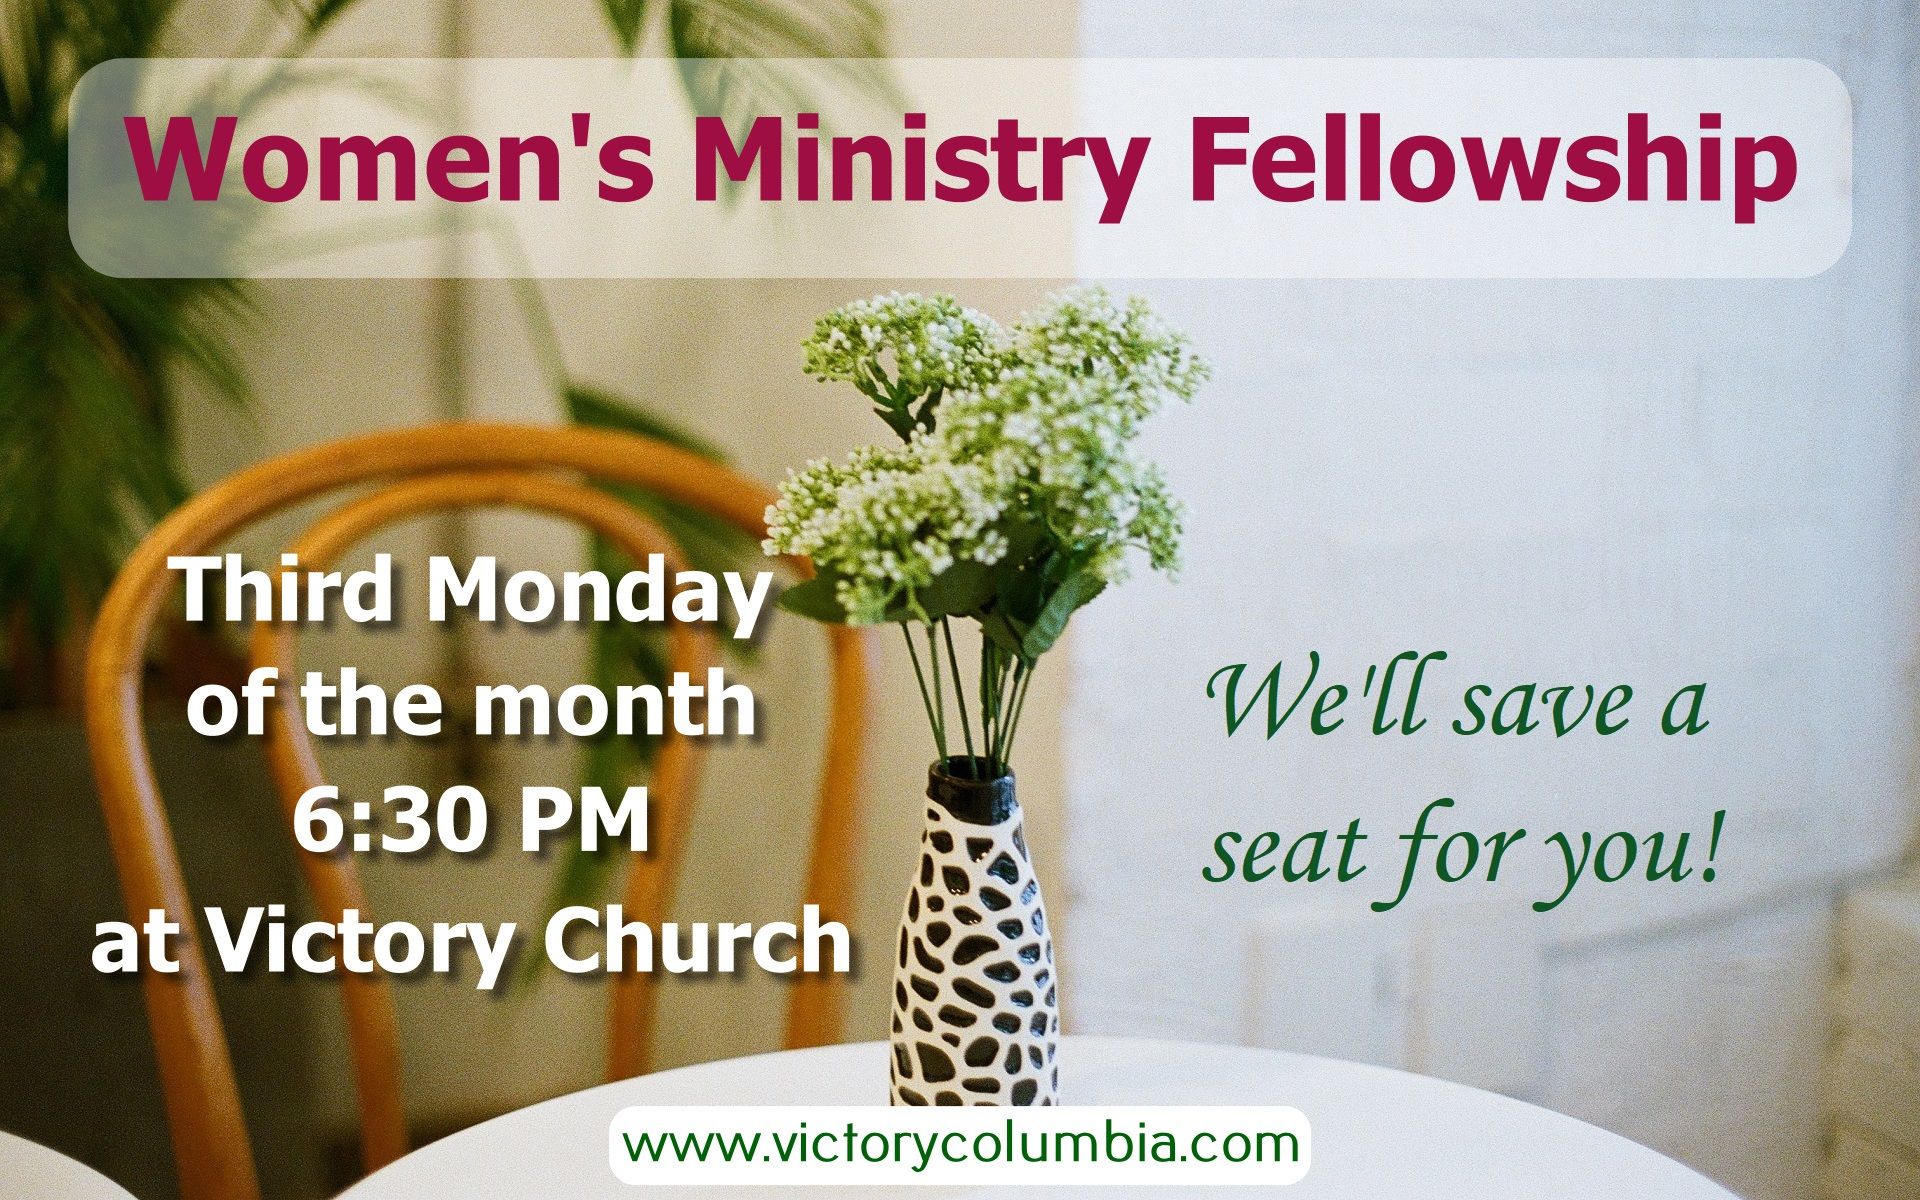 Victory Church | Join Us for Women's Ministry Fellowship, Every Third Monday of the Month!